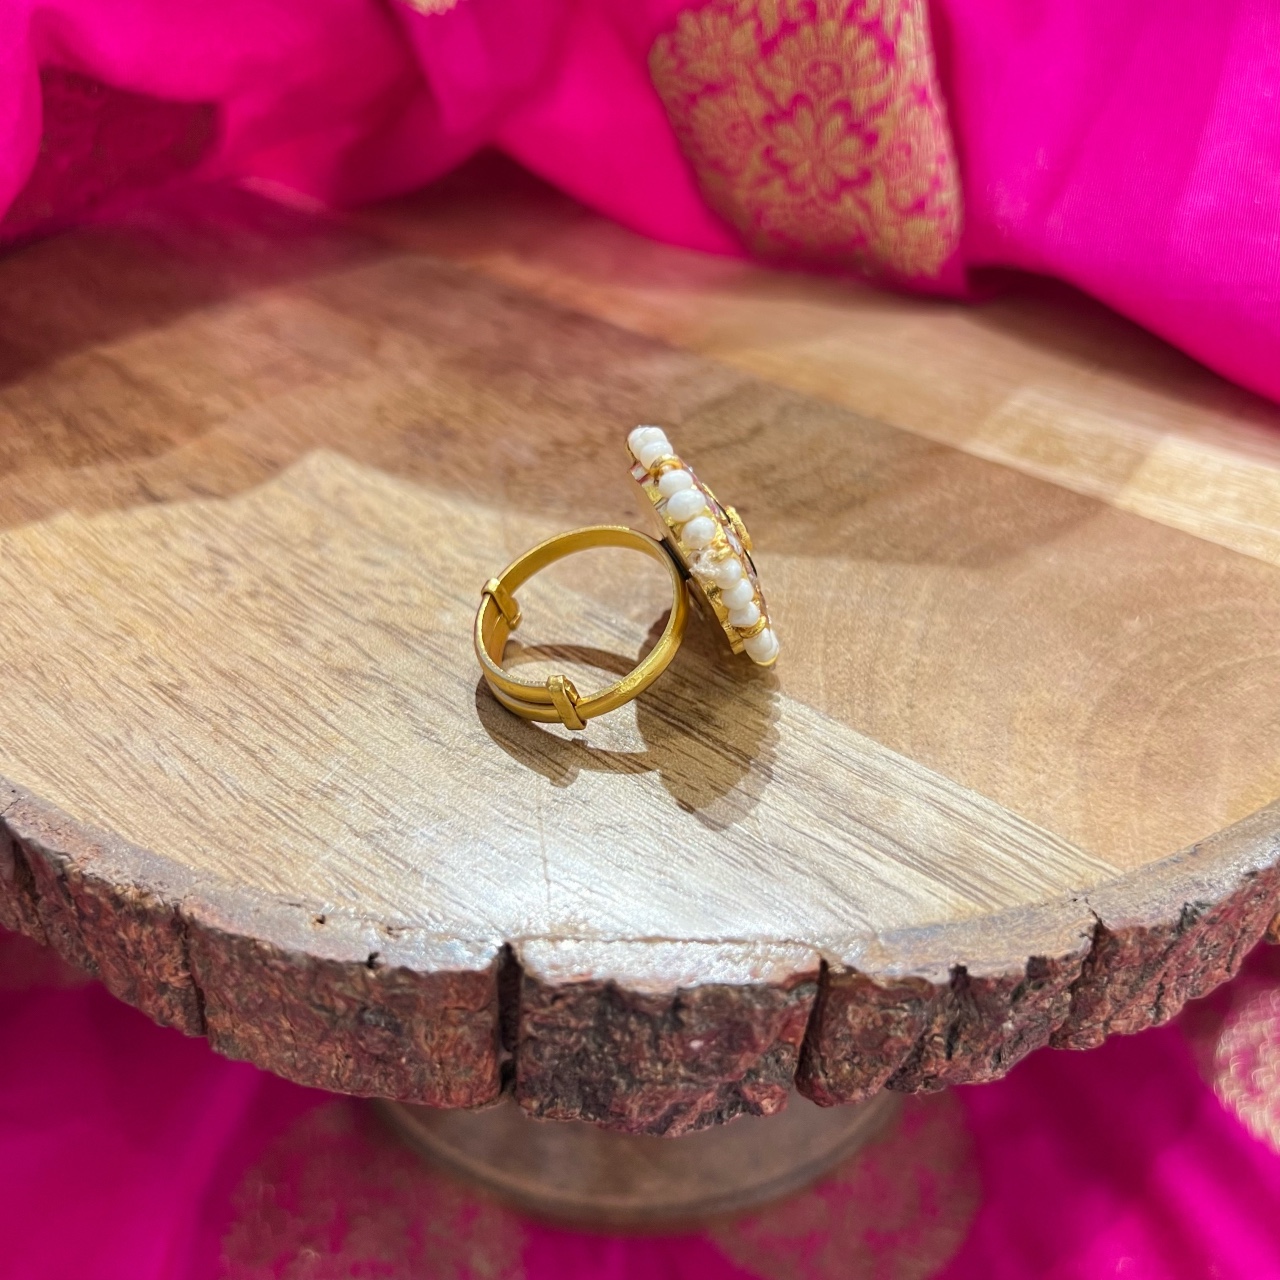 Buy Unique Palette Engagement Ring Platter/Ring Ceremony Plate with Ganesha  Idol/Ring Ceremony Decorative Thali/Ring Ceremony Tray Stylish Online at  Low Prices in India - Amazon.in